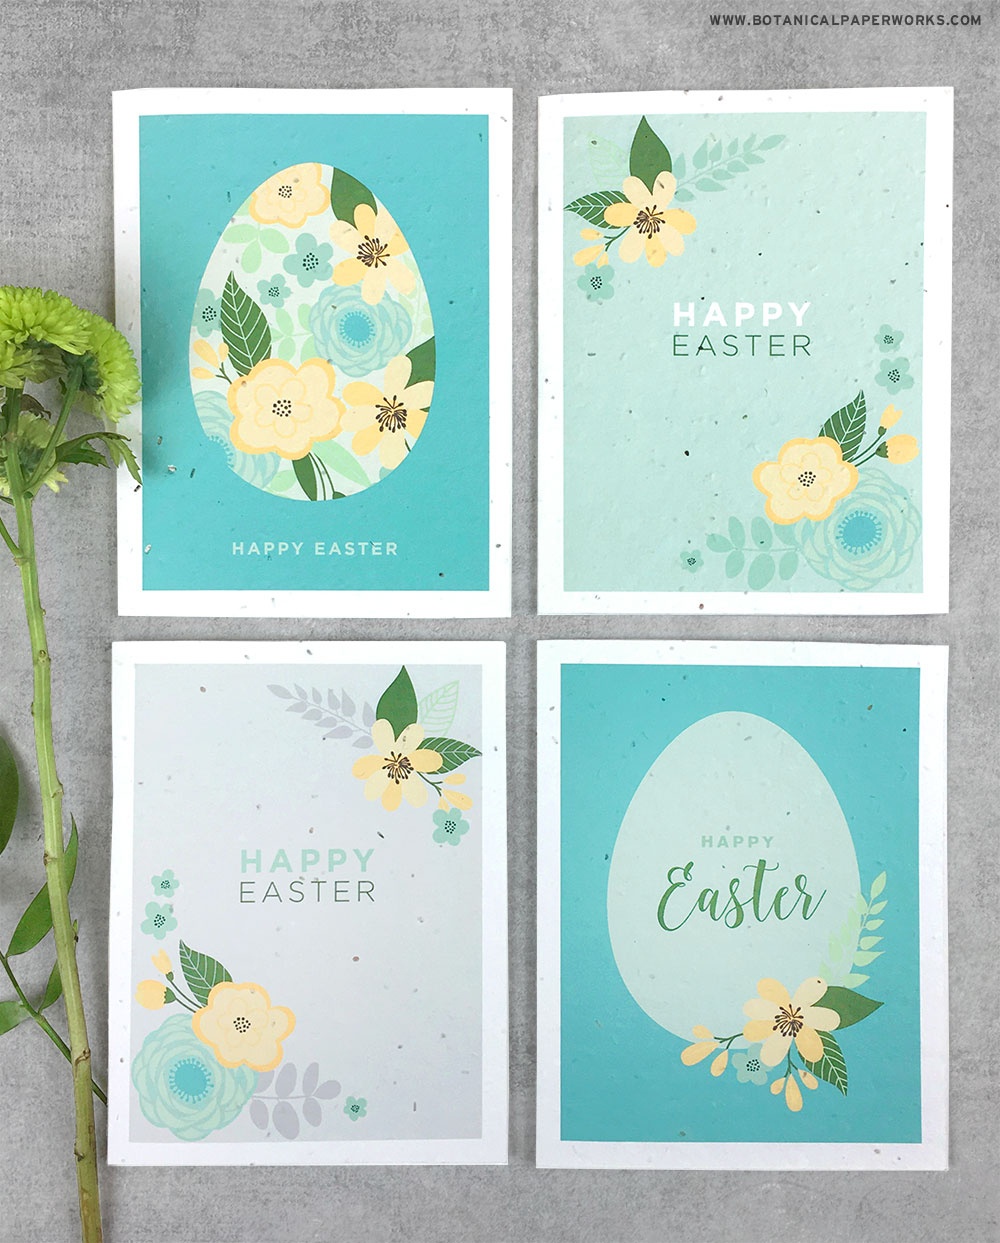 Free Printable} Easter Cards | Blog | Botanical Paperworks - Free Printable Picture Cards